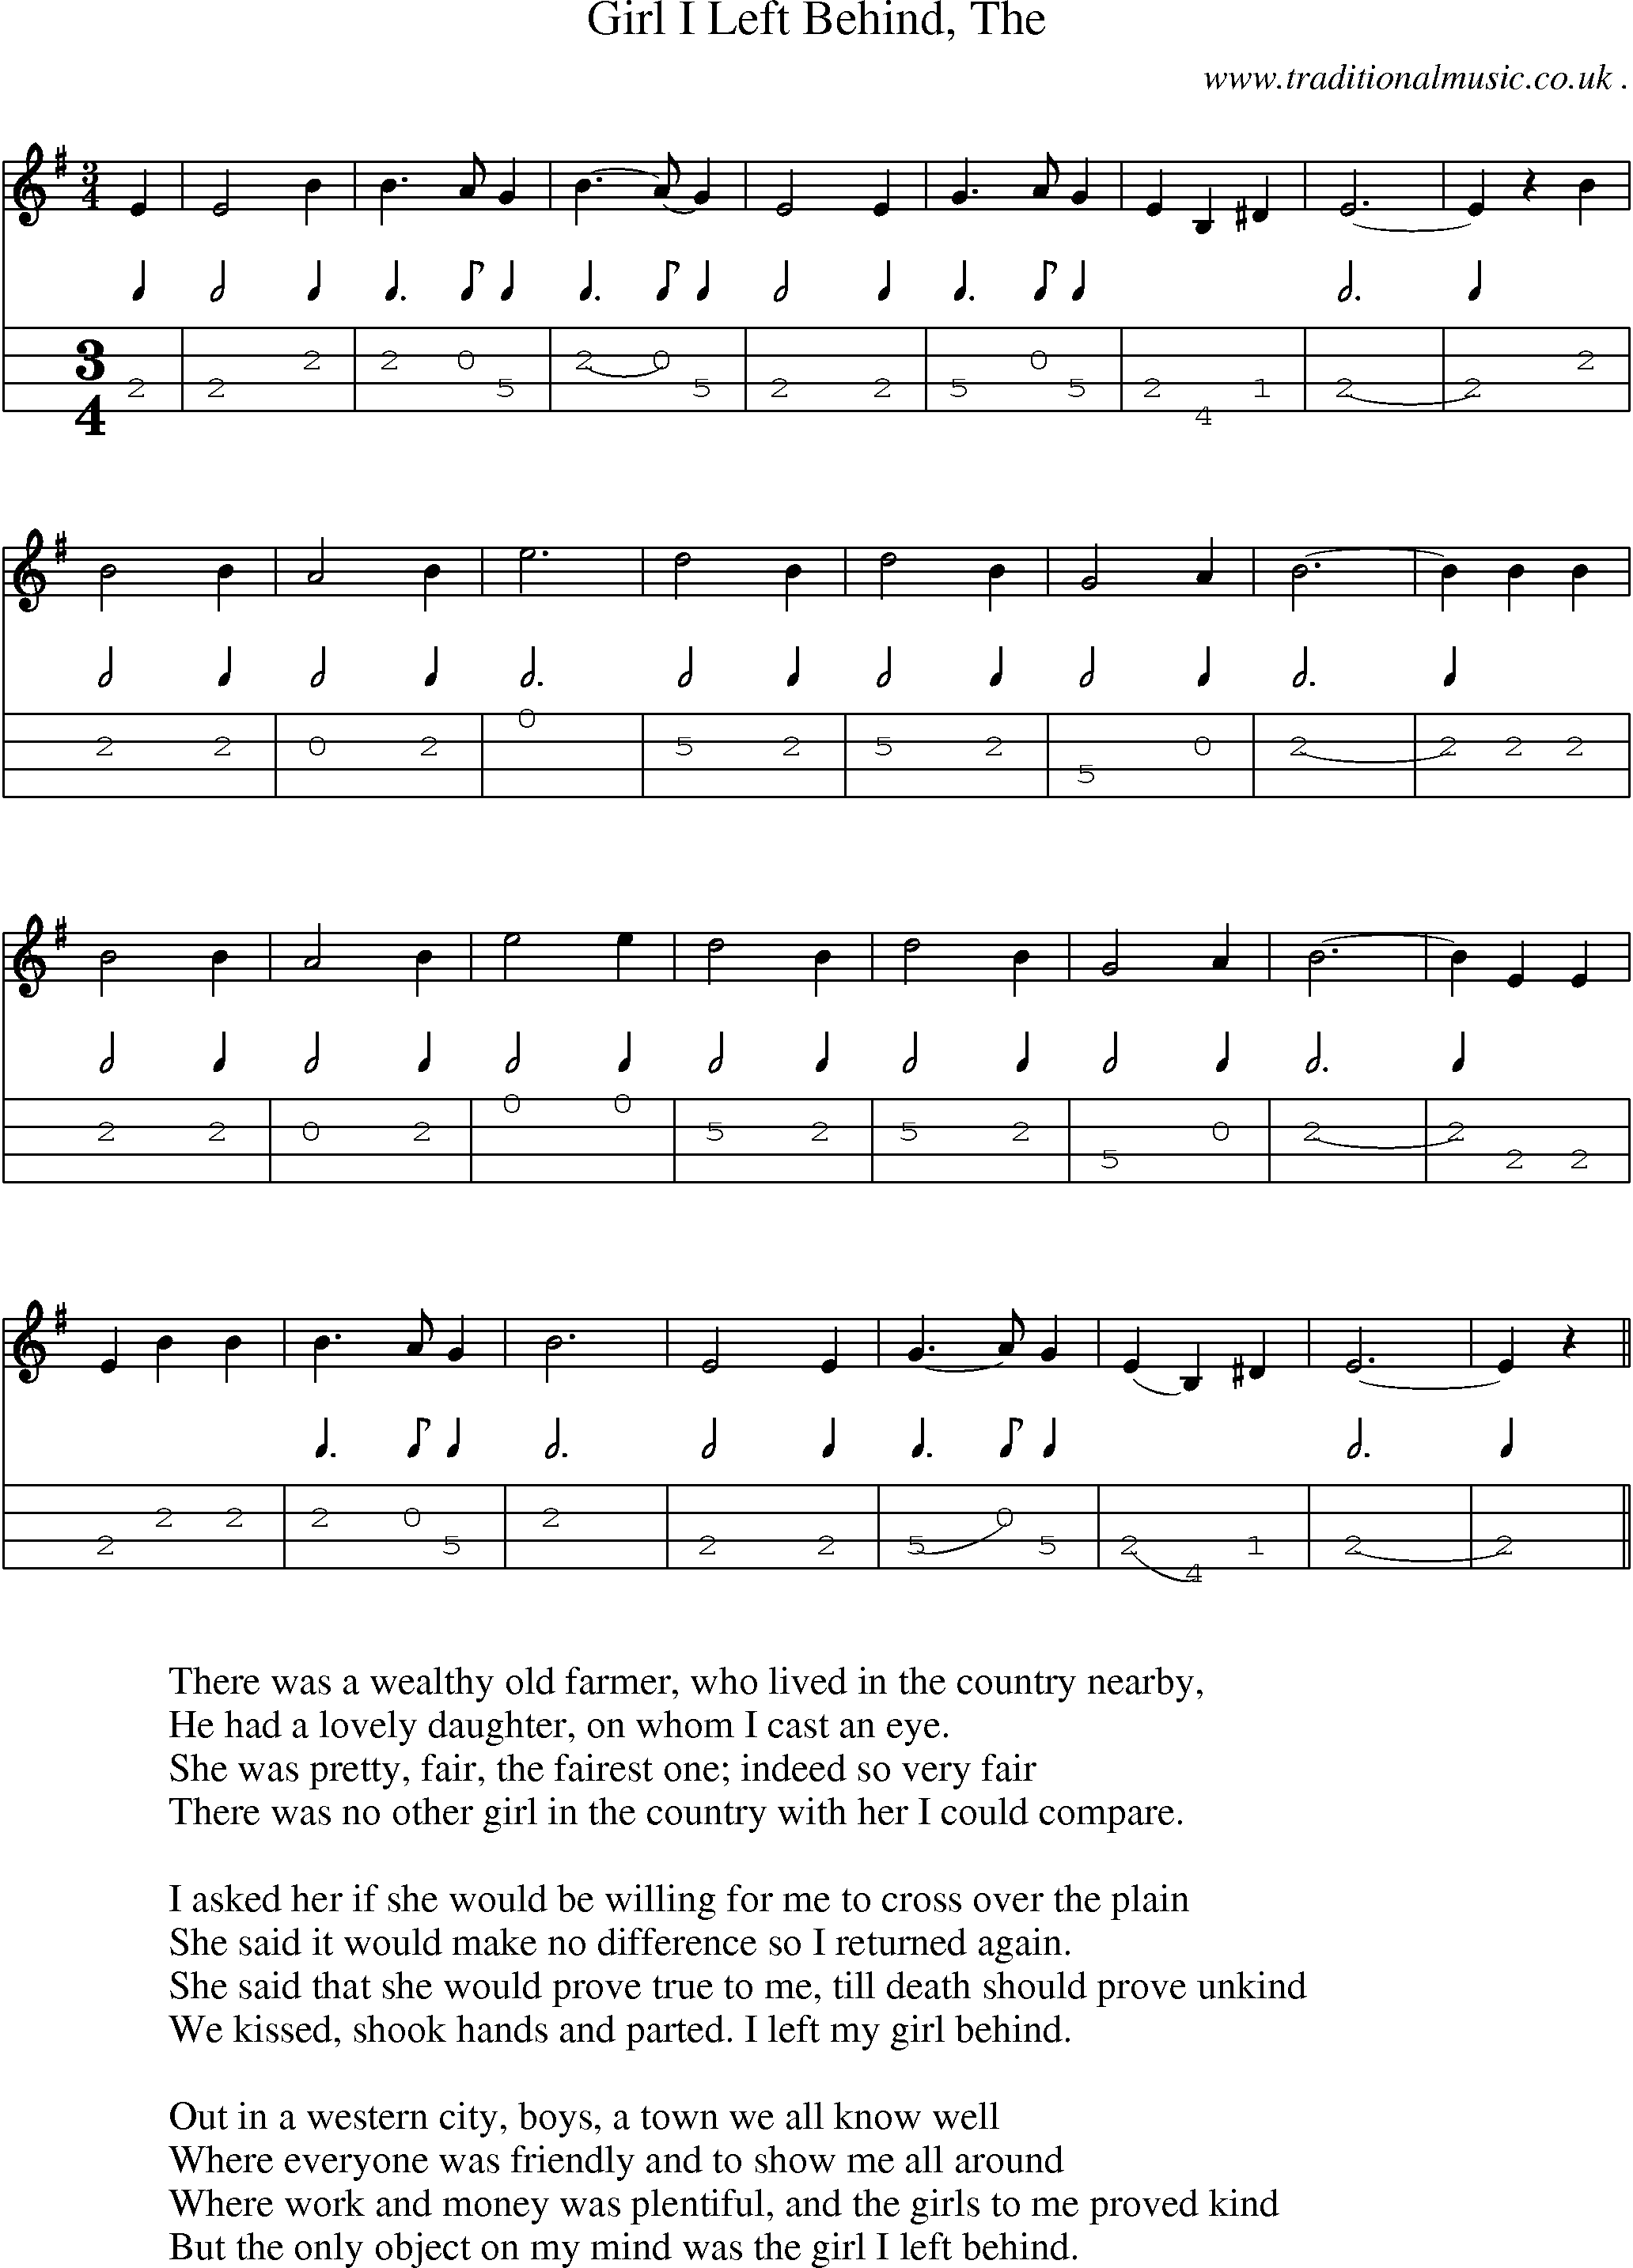 Music Score and Guitar Tabs for Girl I Left Behind The